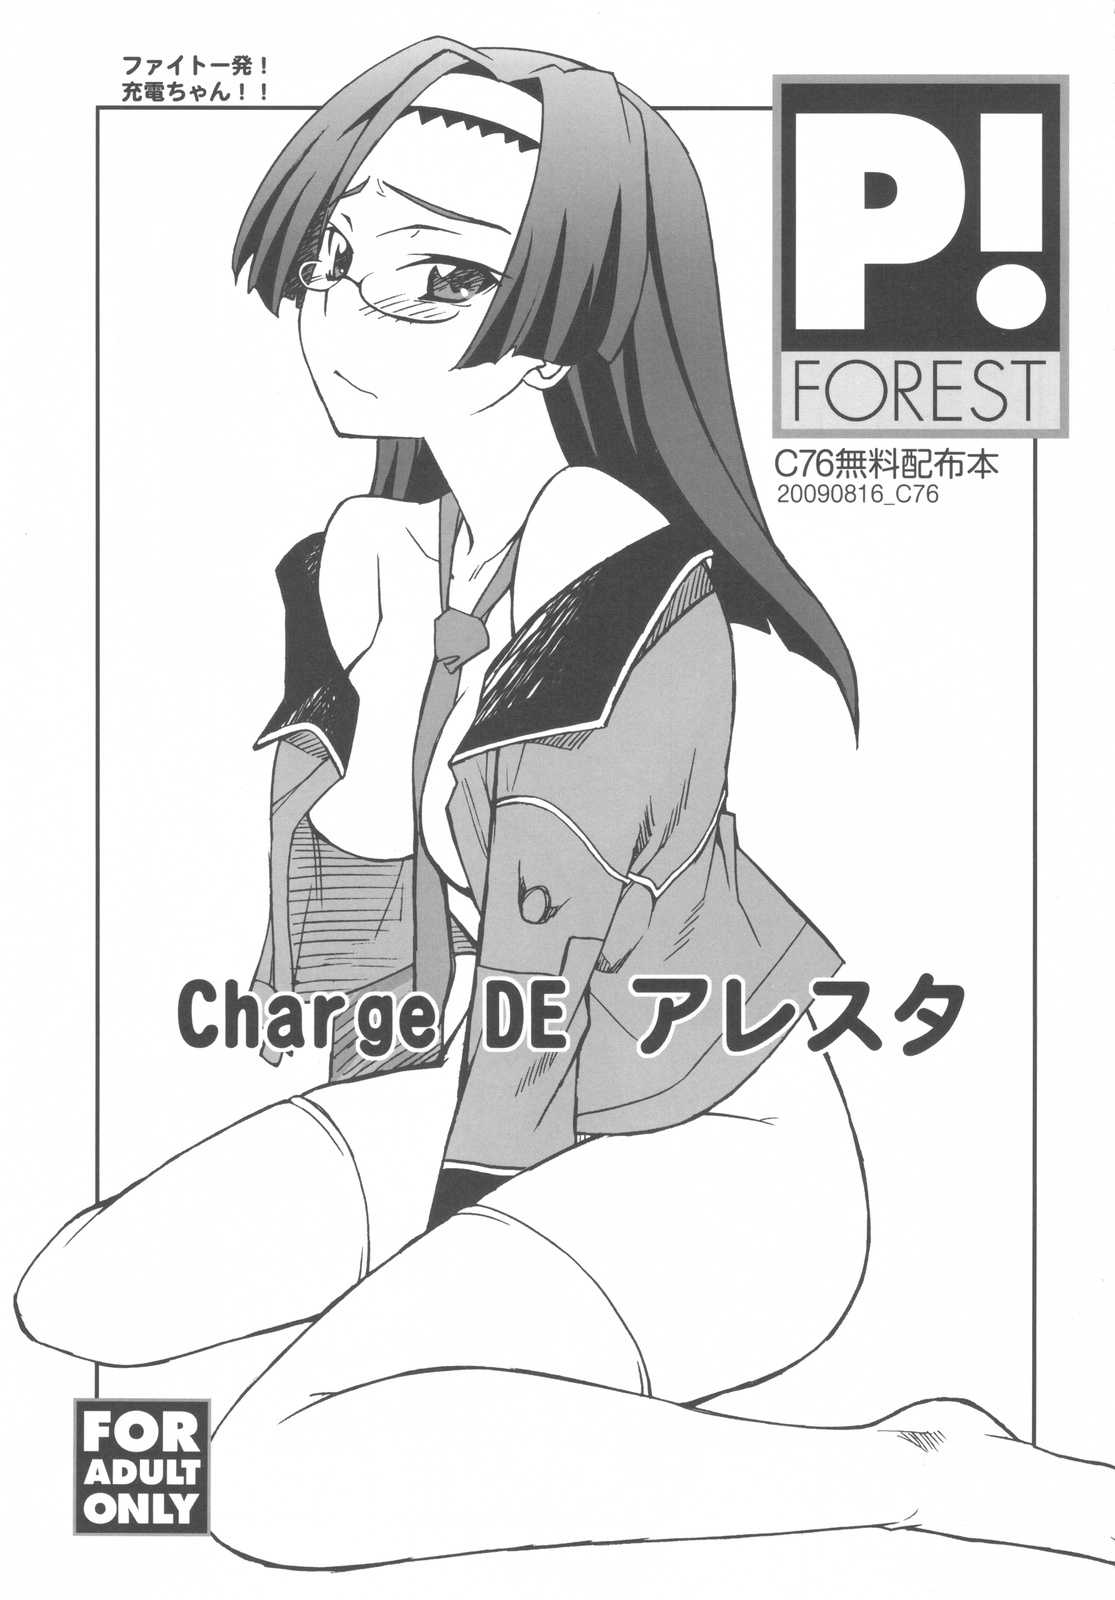 (C76) [P-FOREST] Charge DE Alesta (Fight Ippatsu! Juuden-Chan!!) (C76) (同人誌) [P-FOREST] Charge DE アレスタ (充電ちゃん)